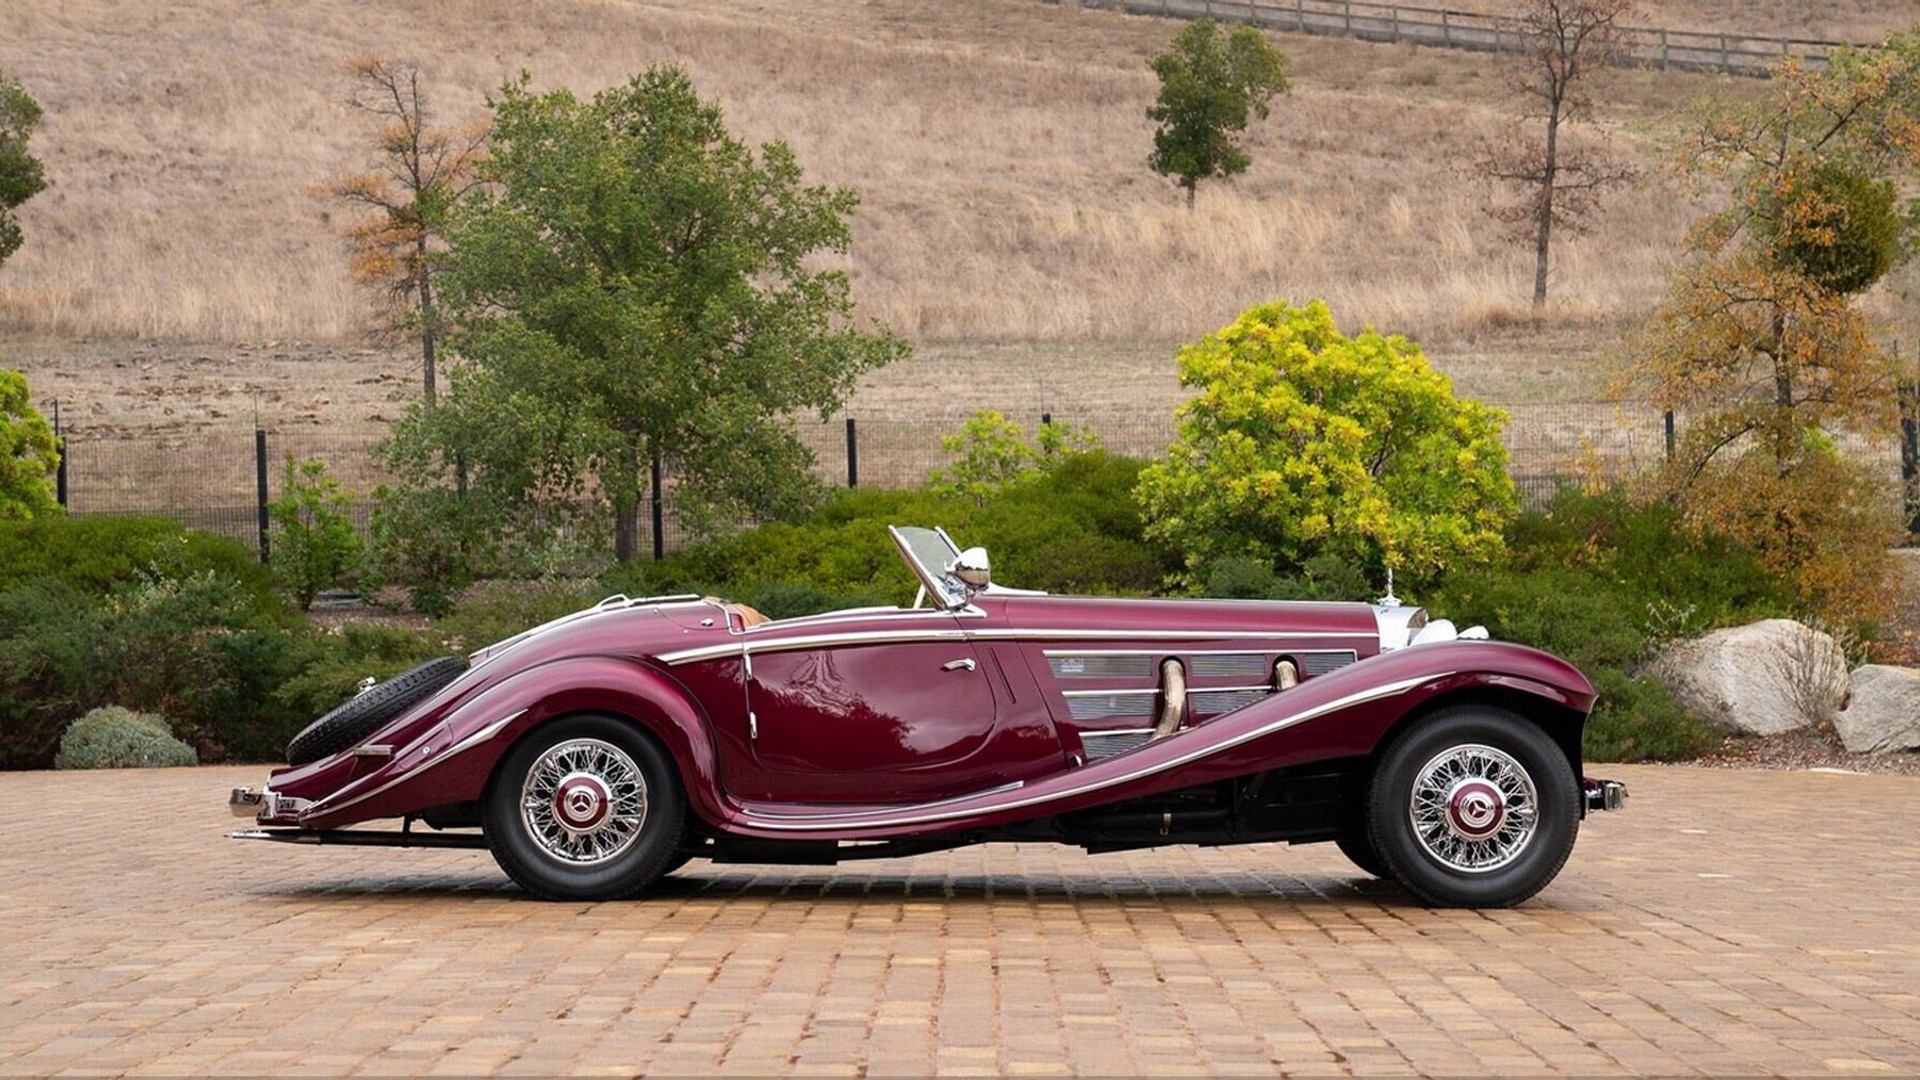 1938 Mercedes-Benz 540K Special Roadster bearing chassis no. 408338 - Photo credit: RM Sotheby's